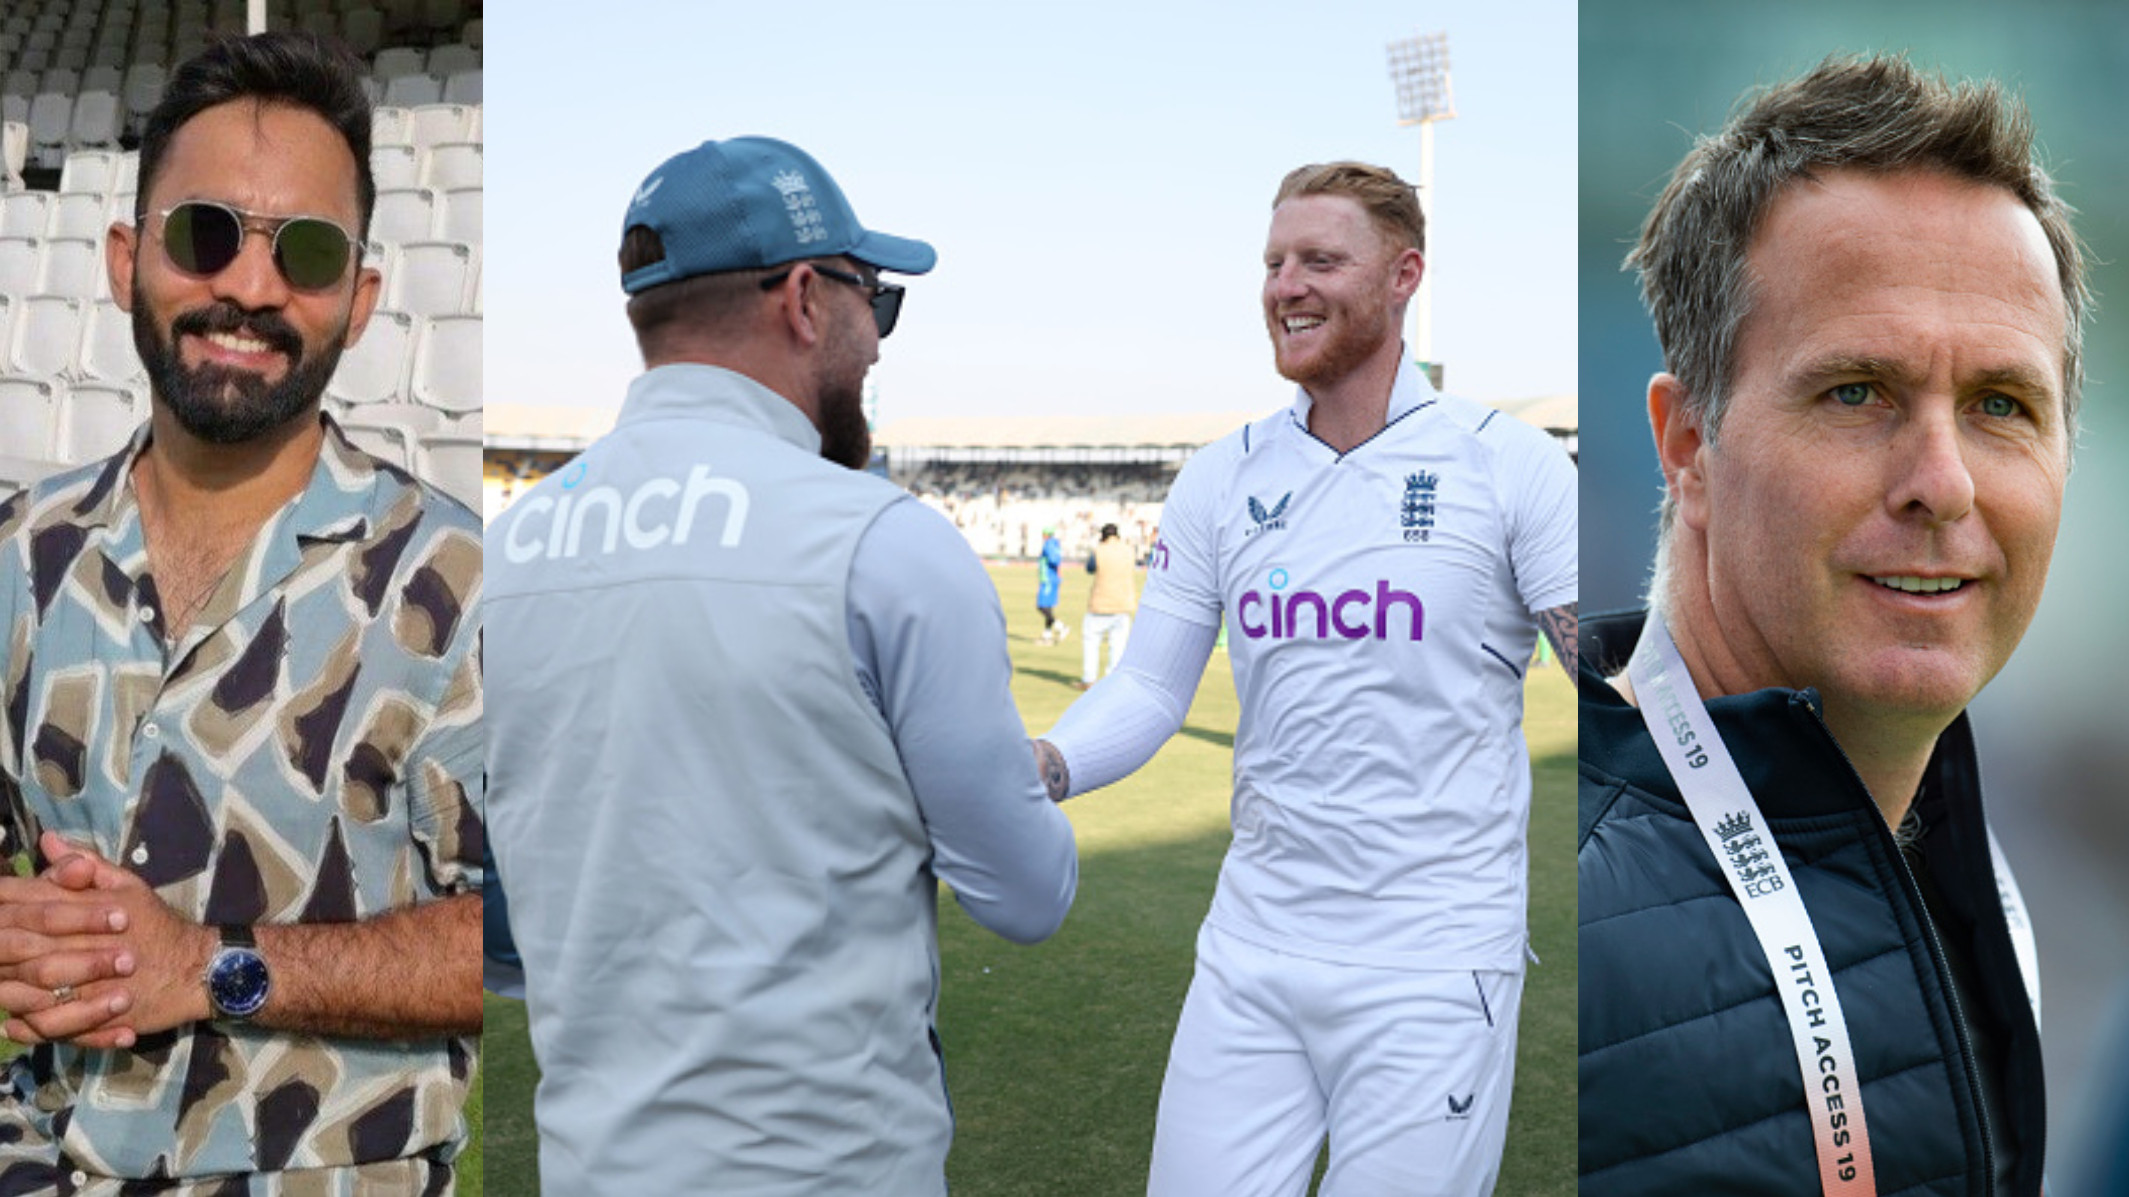 PAK v ENG 2022: Cricket fraternity reacts as England achieves 2-0 lead in series with a 26-run win in Multan Test